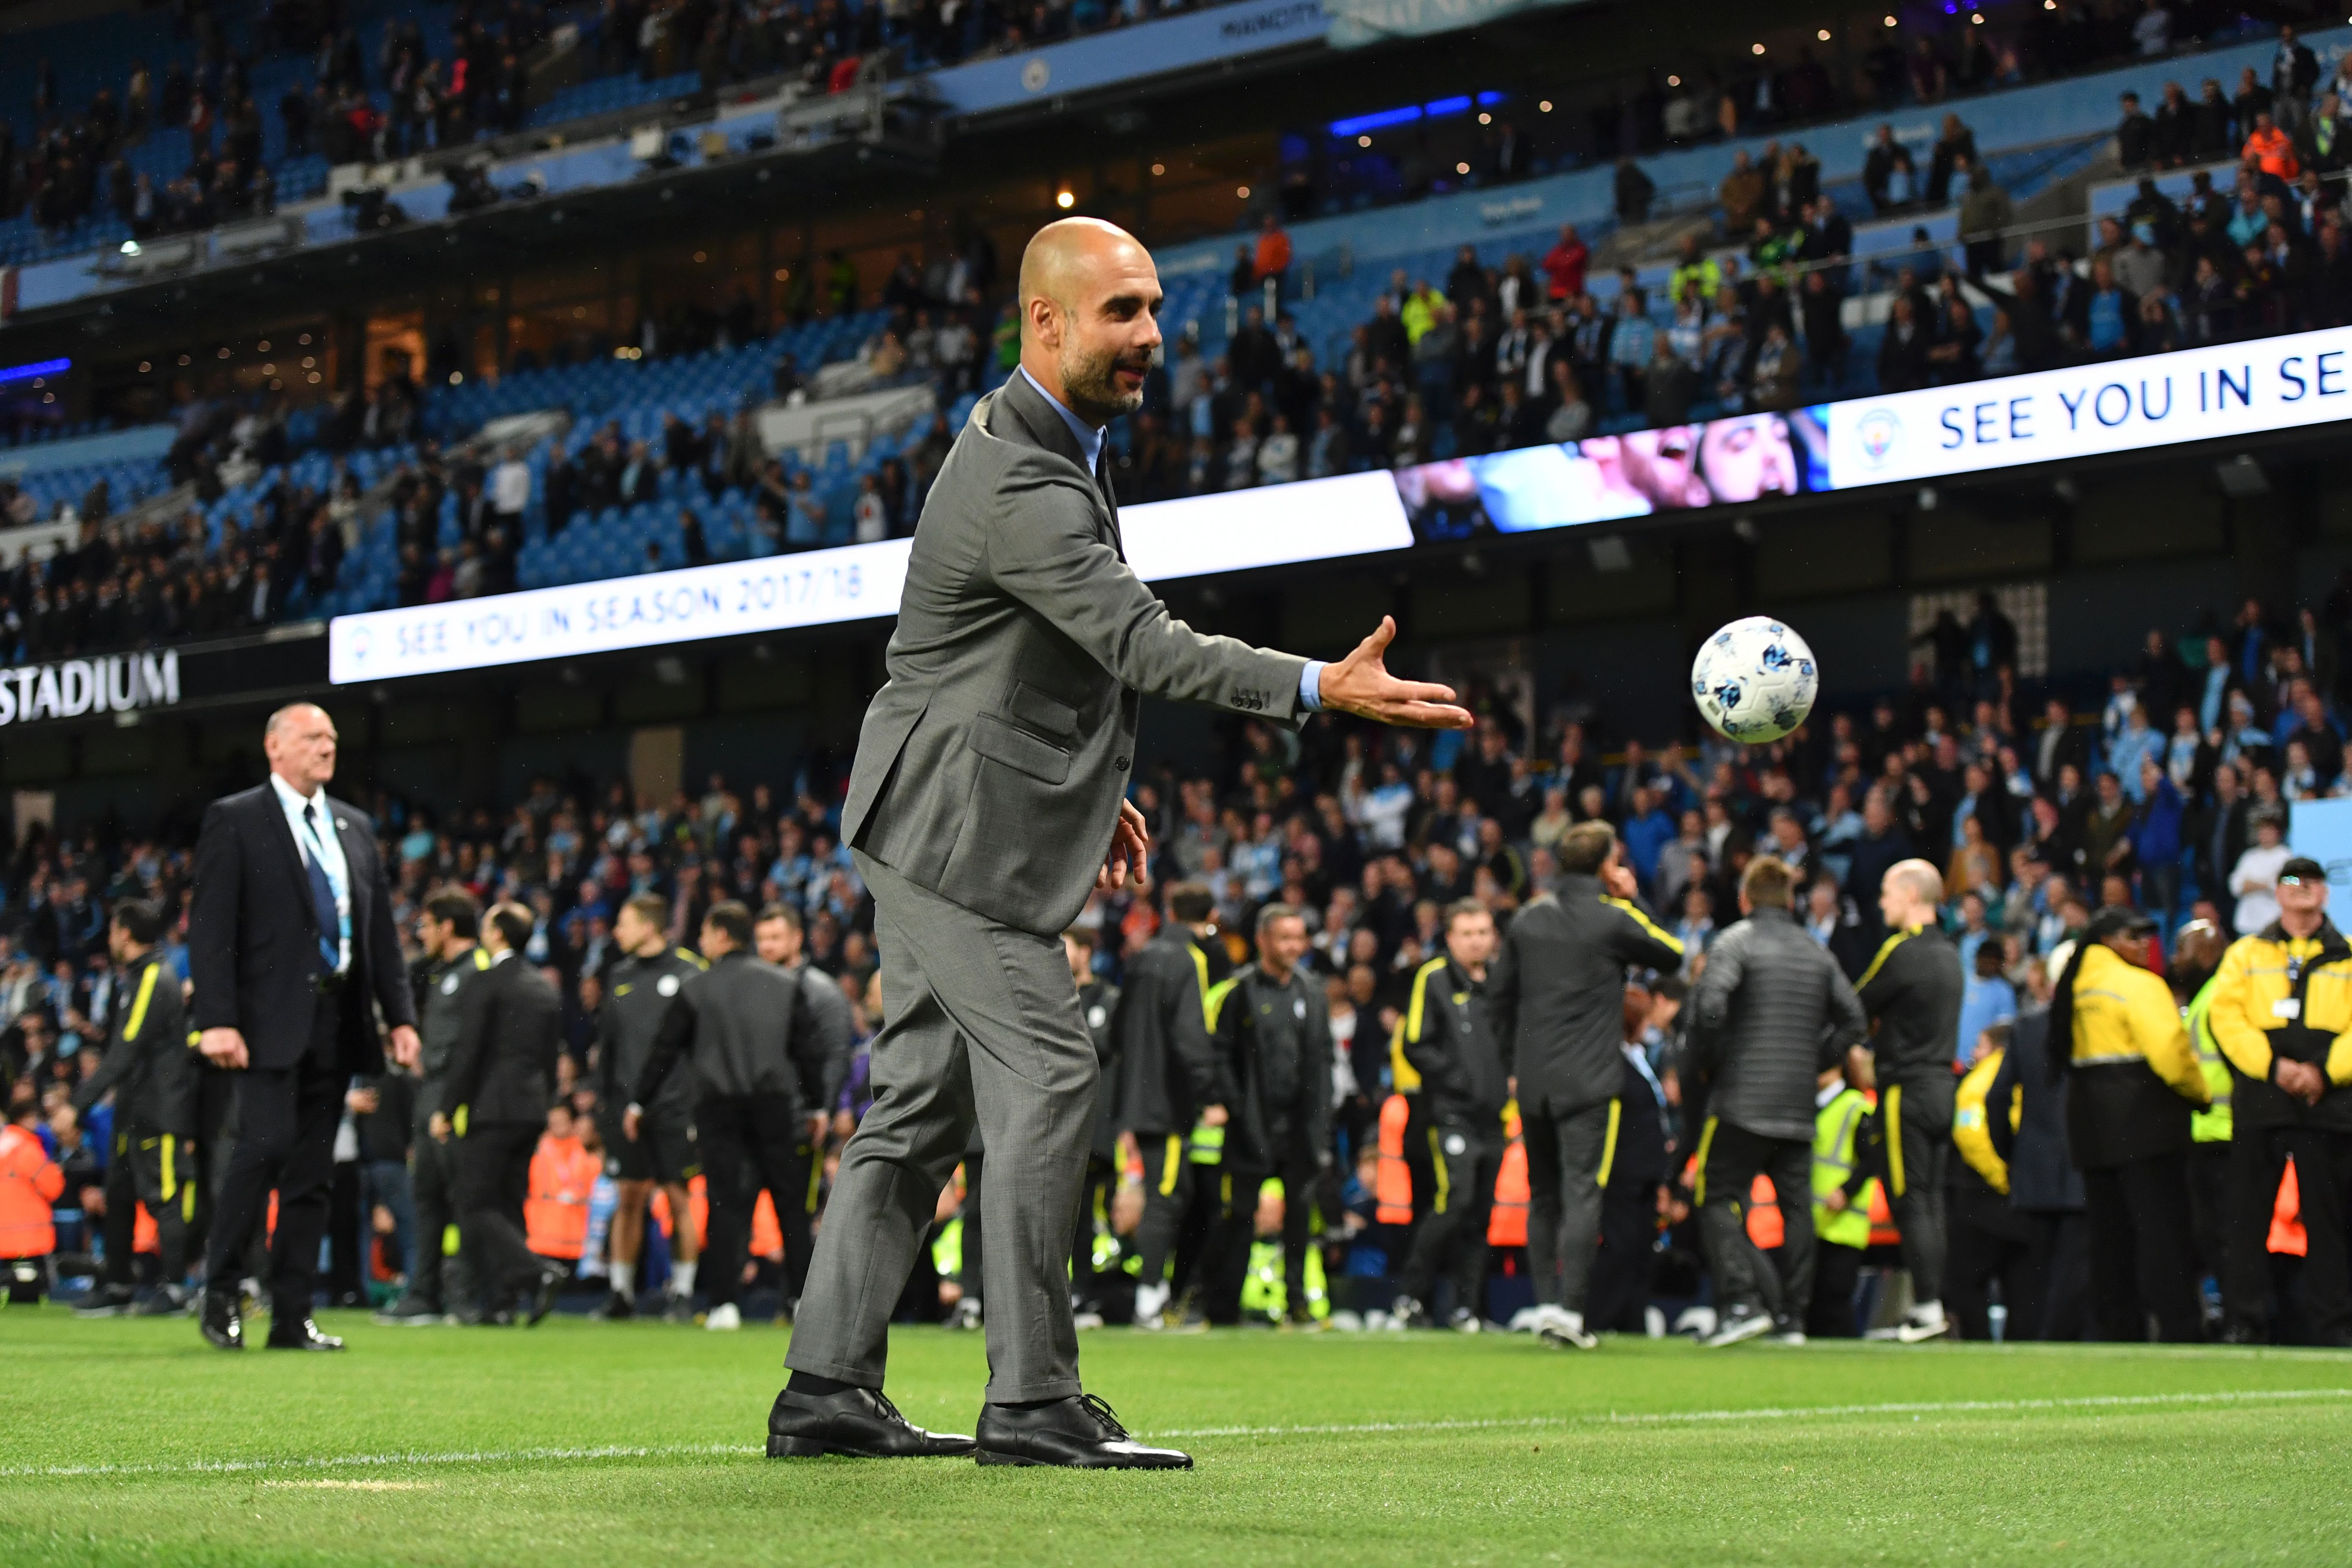 Manchester City's Spanish manager Pep Guardiola plays with a small ball on the pitch at the end of the English Premier League football match between Manchester City and West Bromwich Albion at the Etihad Stadium in Manchester, north west England, on May 16, 2017. / AFP PHOTO / Anthony Devlin / RESTRICTED TO EDITORIAL USE. No use with unauthorized audio, video, data, fixture lists, club/league logos or 'live' services. Online in-match use limited to 75 images, no video emulation. No use in betting, games or single club/league/player publications.  /         (Photo credit should read ANTHONY DEVLIN/AFP/Getty Images)